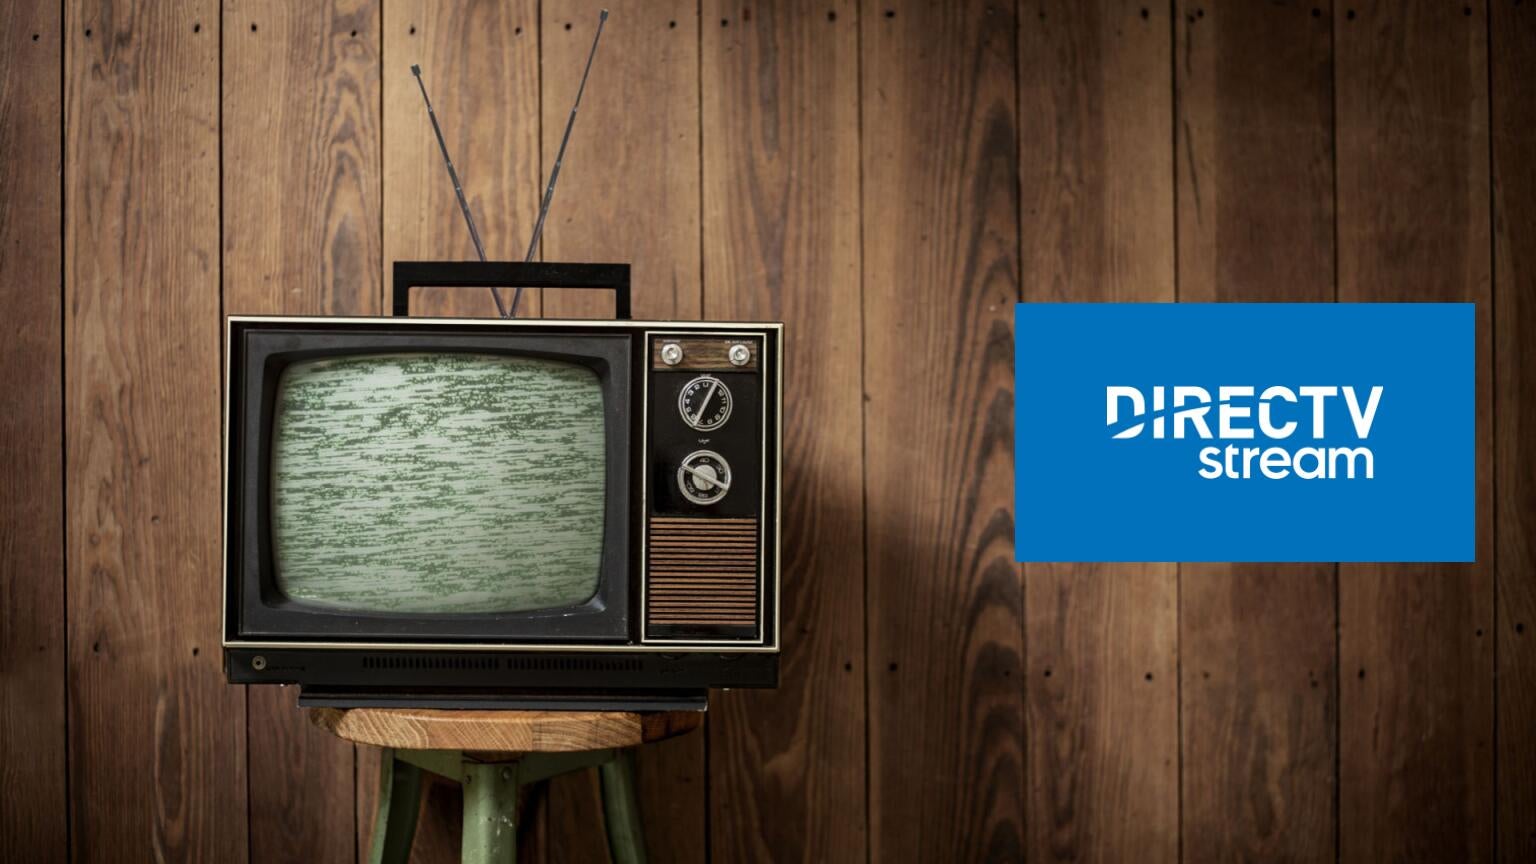 TEGNA and DIRECTV are heading for a retransmission dispute that could black ot 64 channels nationwide.